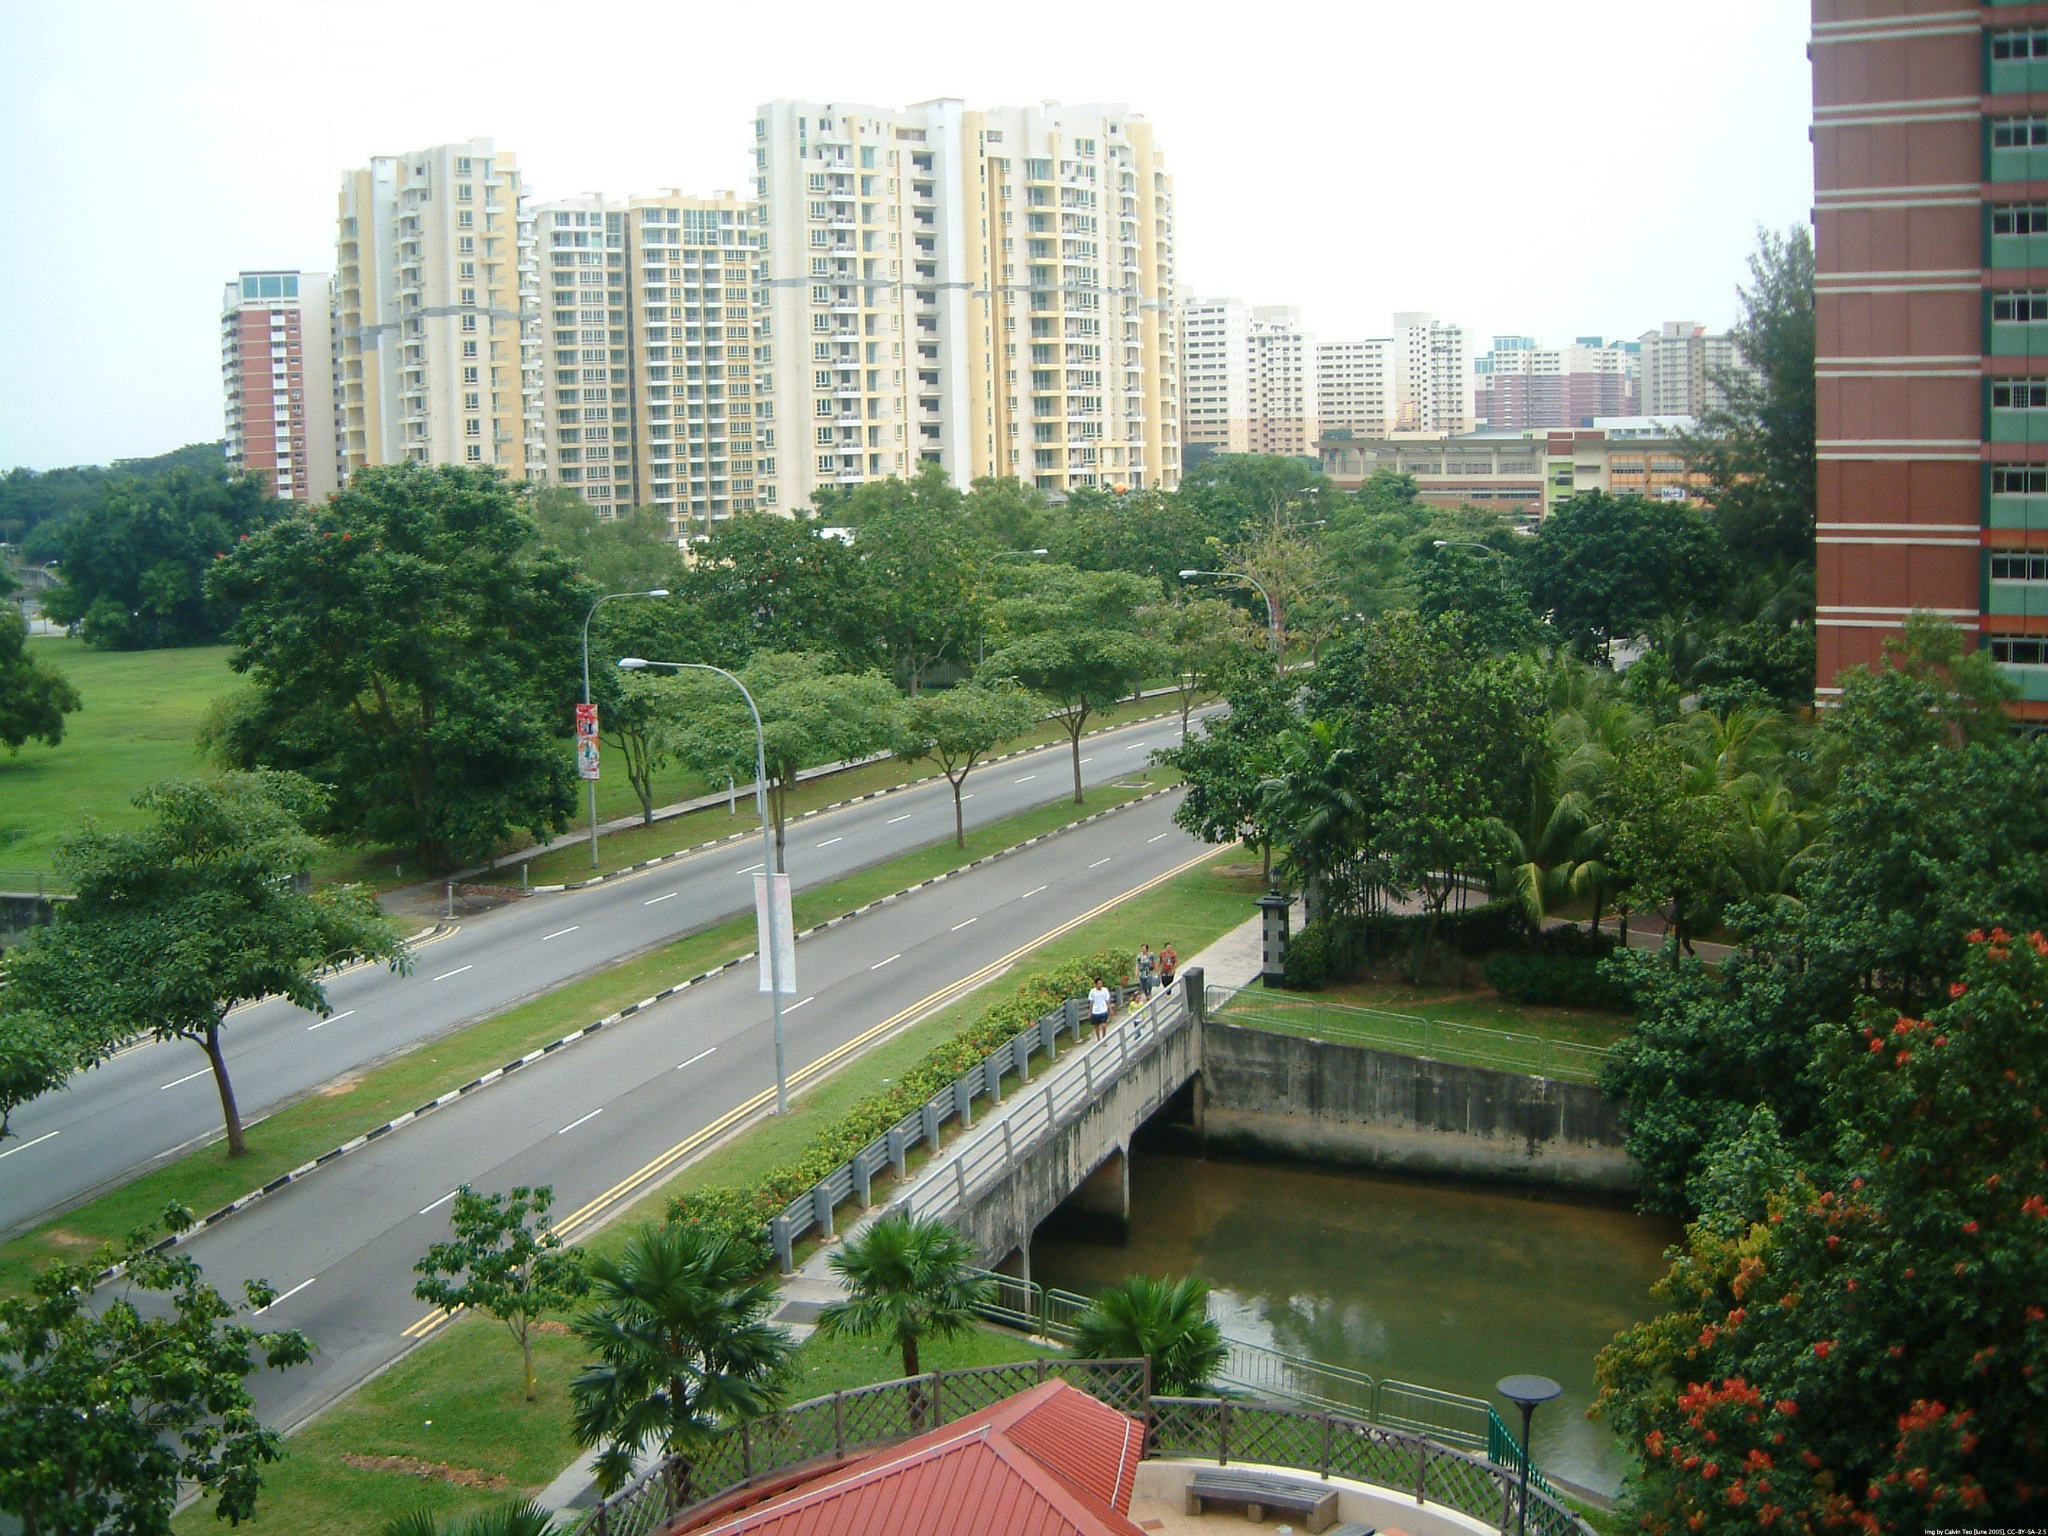 The roads and tranquil greenery within the vicinity of Pasir Ris Town